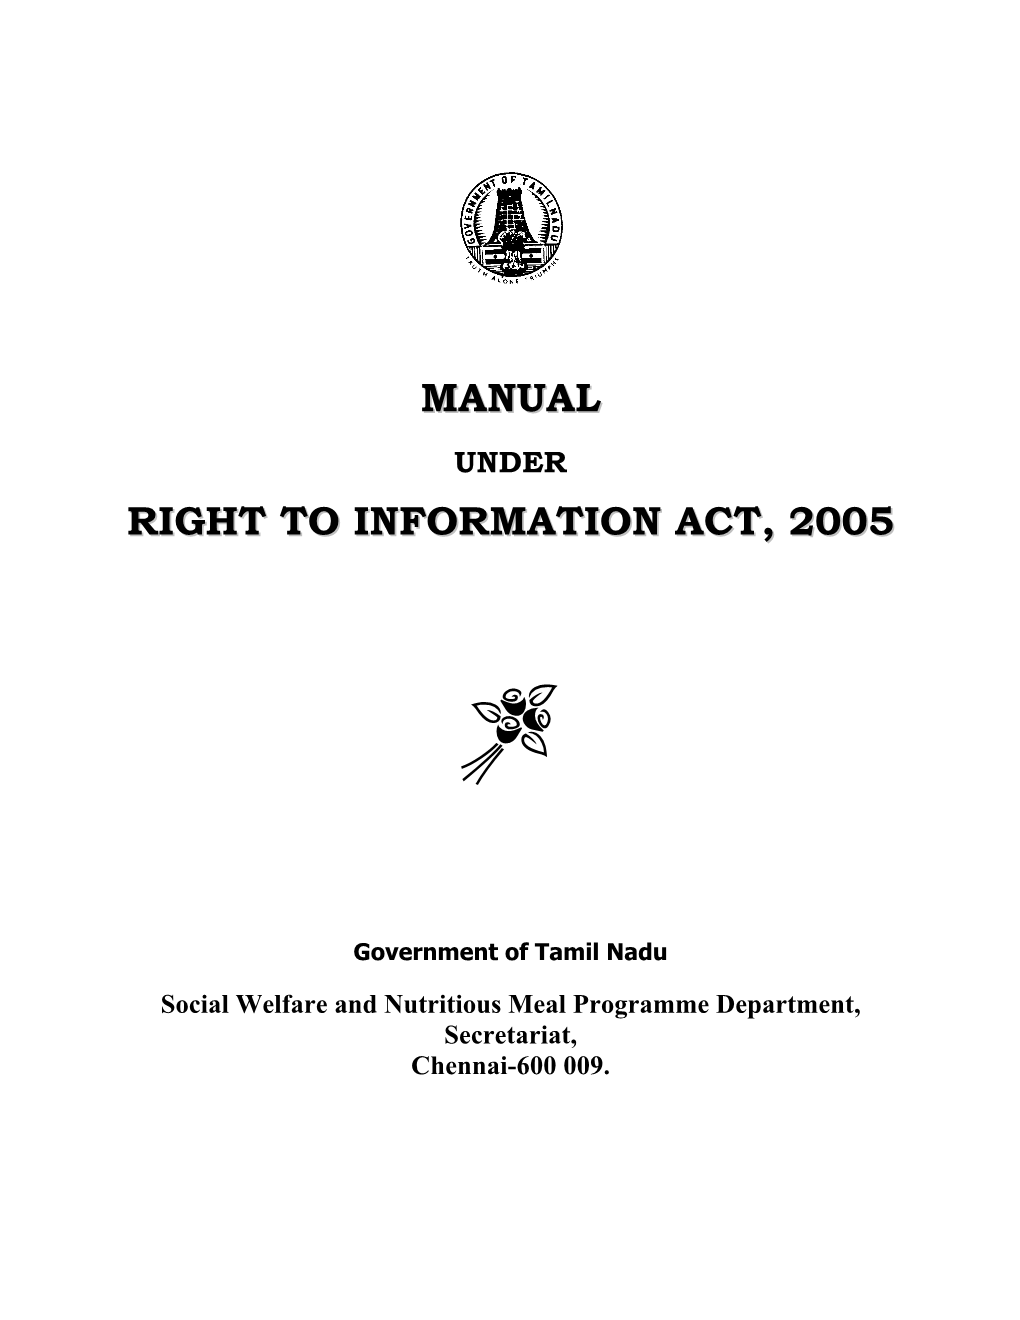 Manual Right to Information Act, 2005